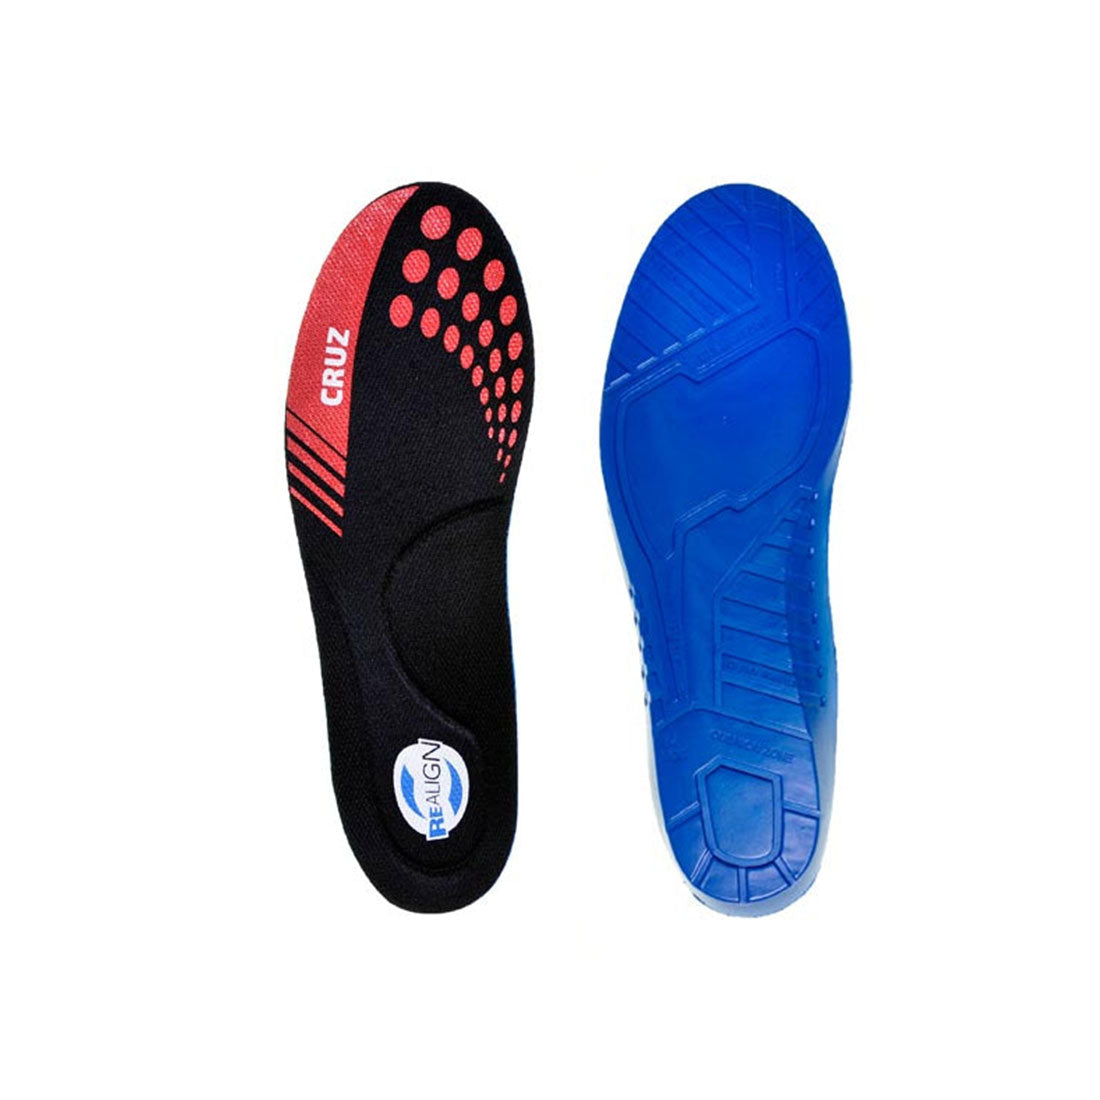 Realign Cruz Innersole Insoles and Fitting Aids